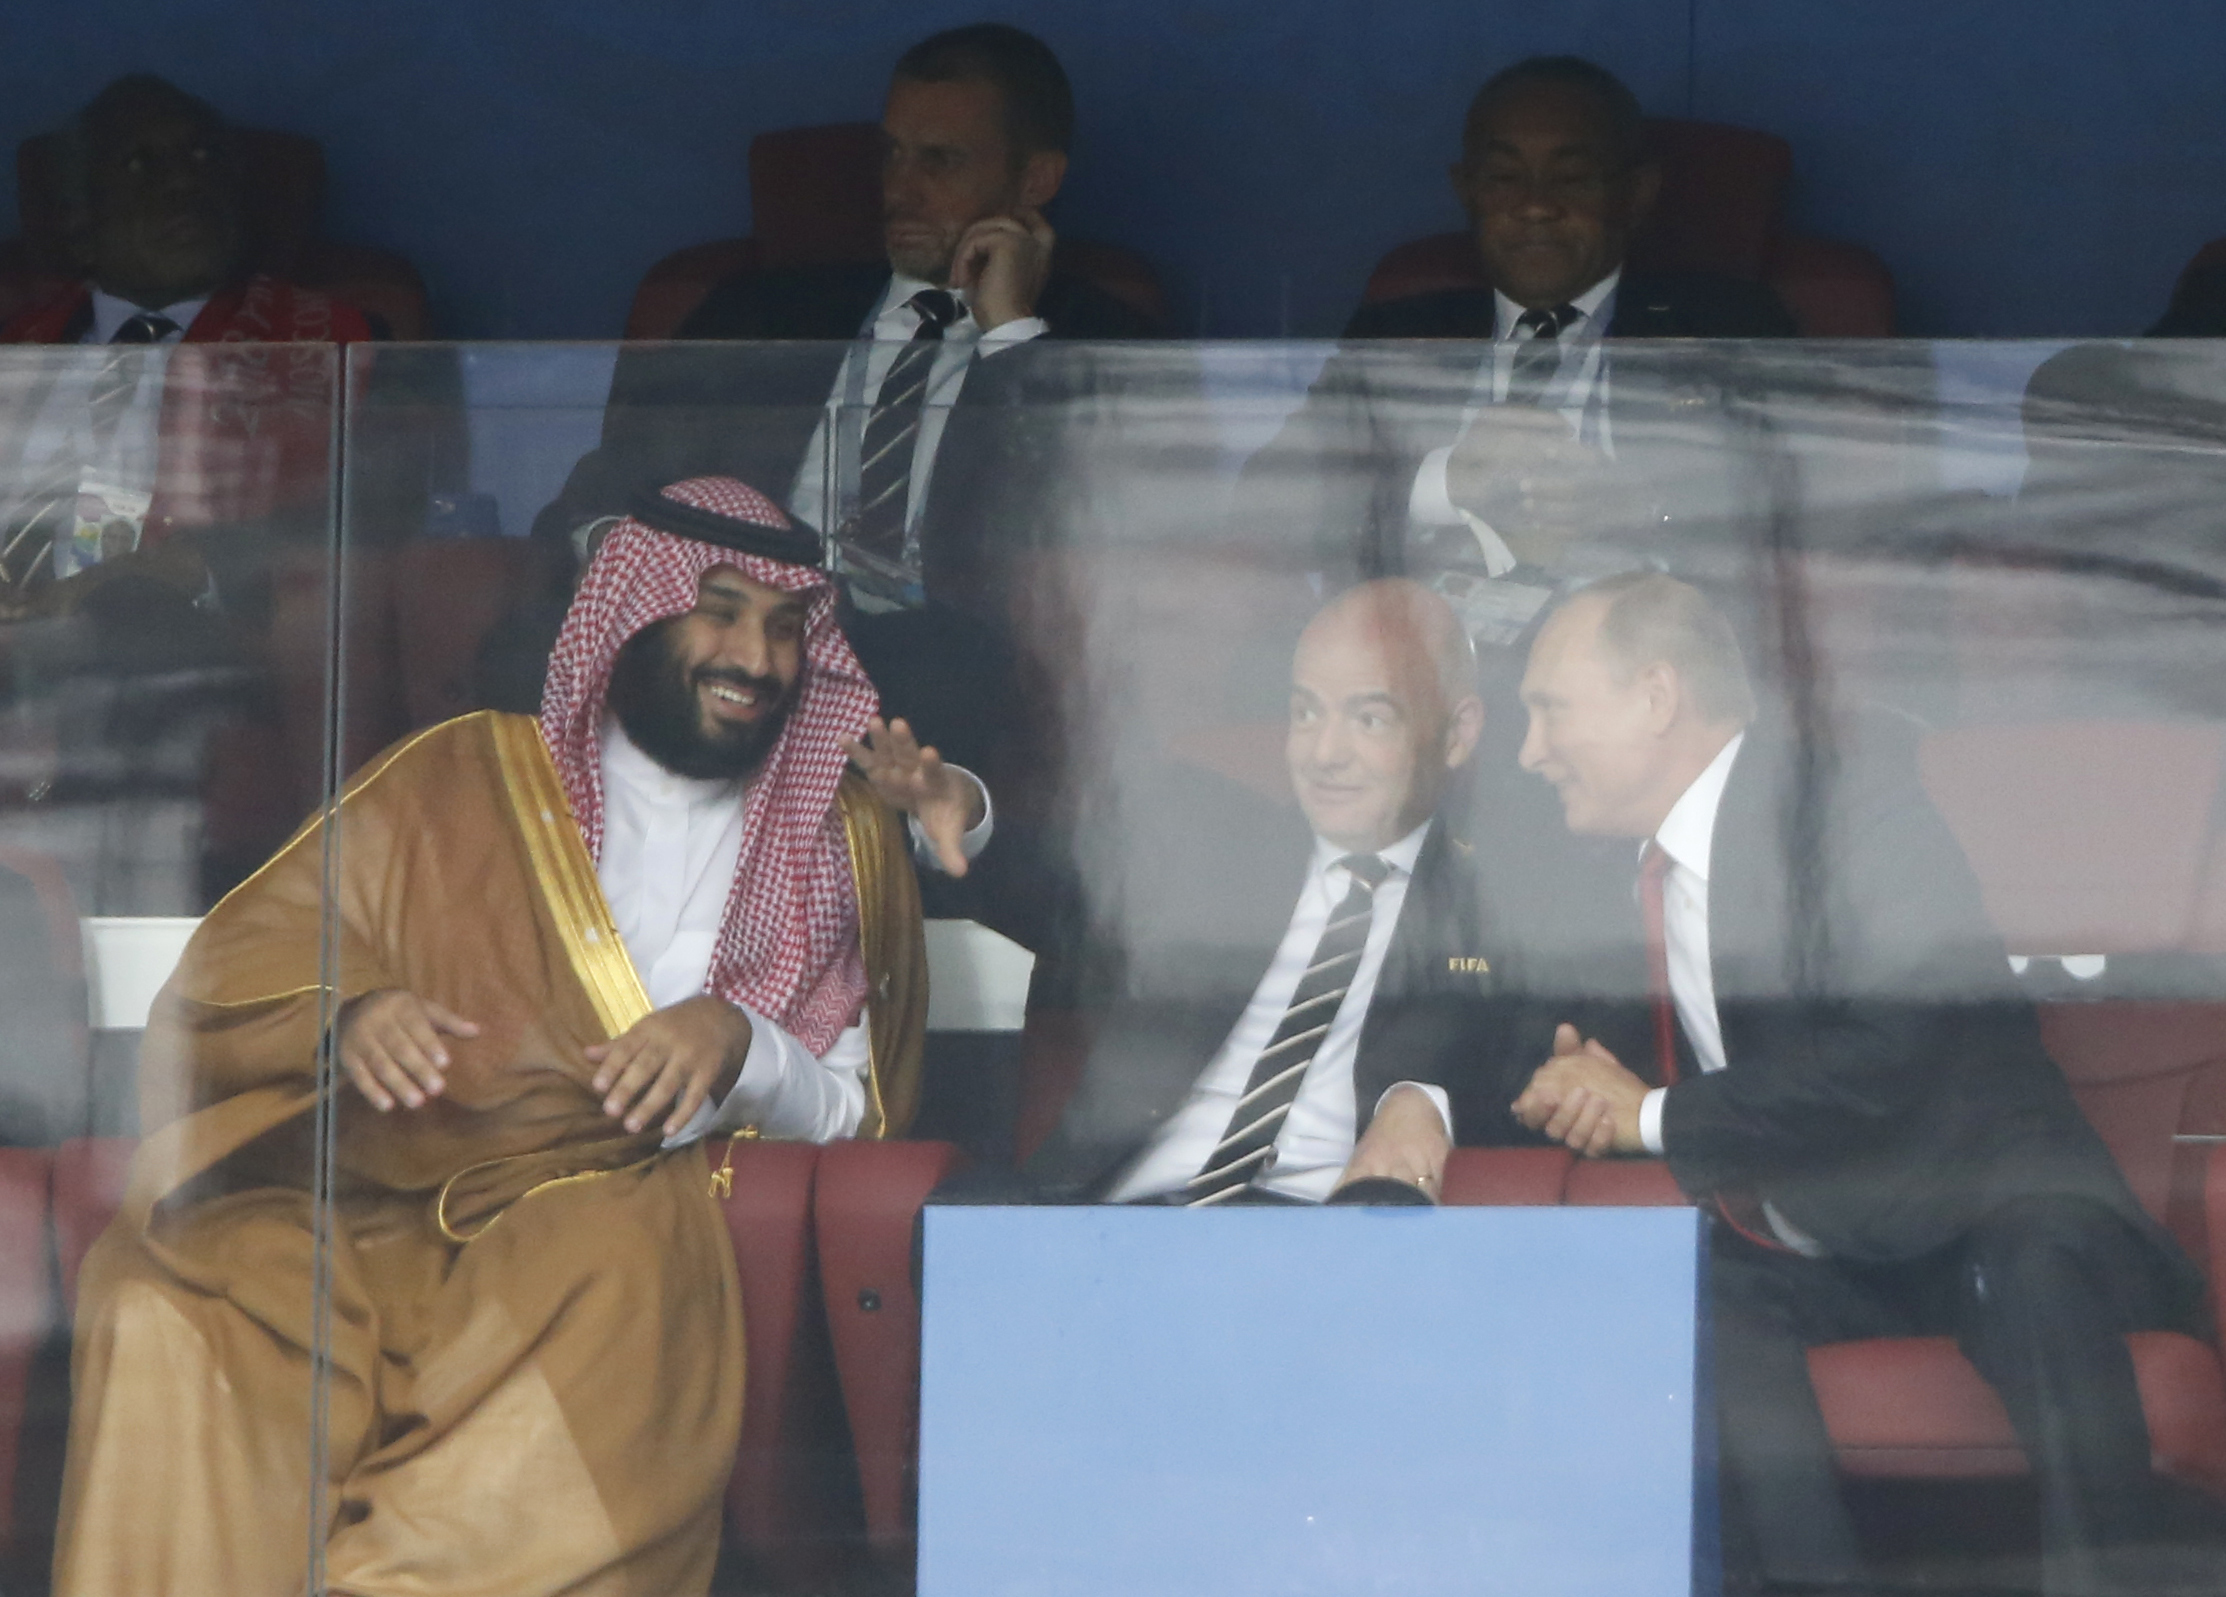 FILE - Saudi Arabia Crown Prince Mohammed bin Salman, left, FIFA President Gianni Infantino, center, and Russian President Vladimir Putin watch the match between Russia and Saudi Arabia which opens the 2018 soccer World Cup at the Luzhniki stadium in Moscow, Russia, on June 14, 2018. If Saudi Arabia could have designed a process for choosing future World Cup hosts, it might look similar to what FIFA unveiled for the 2030 and 2034 men’s soccer tournaments. The Saudi Arabian soccer federation became the favored candidate to host in 2034. (AP Photo/Hassan Ammar, File)